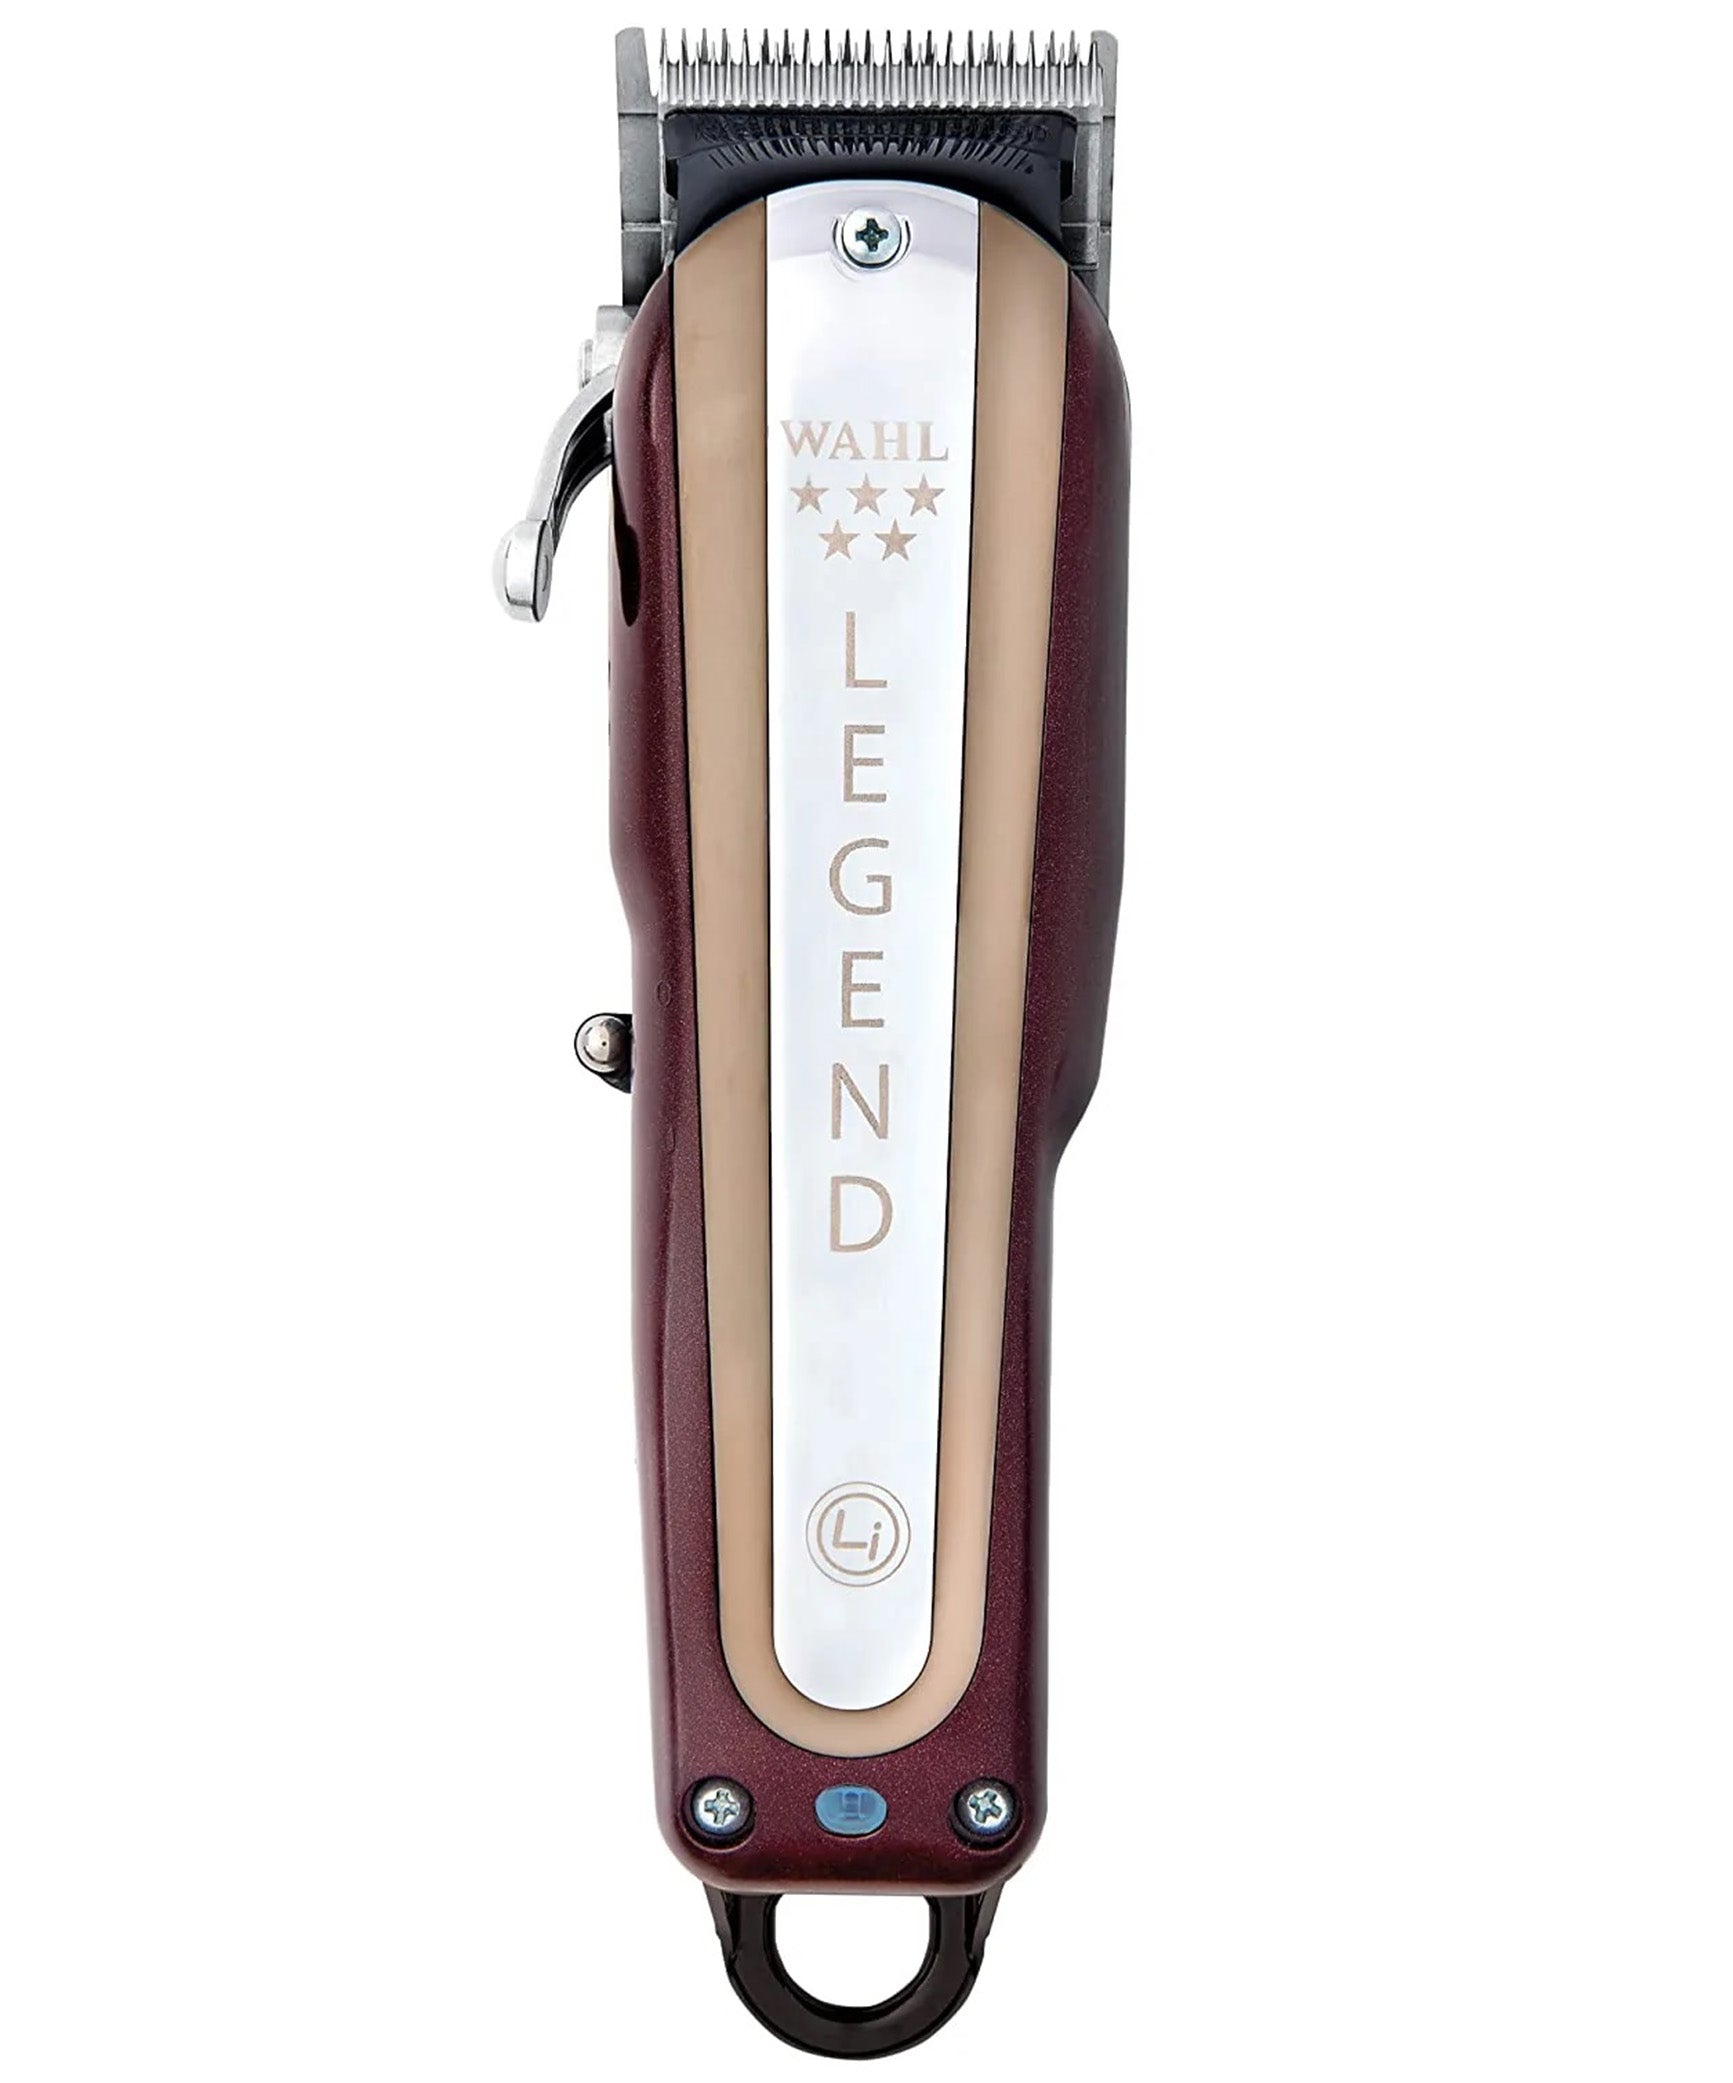 Wahl 5 Star Professional Hair Clipper | Grooming Kit for Men | Best Personal Care Accessories in Bahrain | Halabh